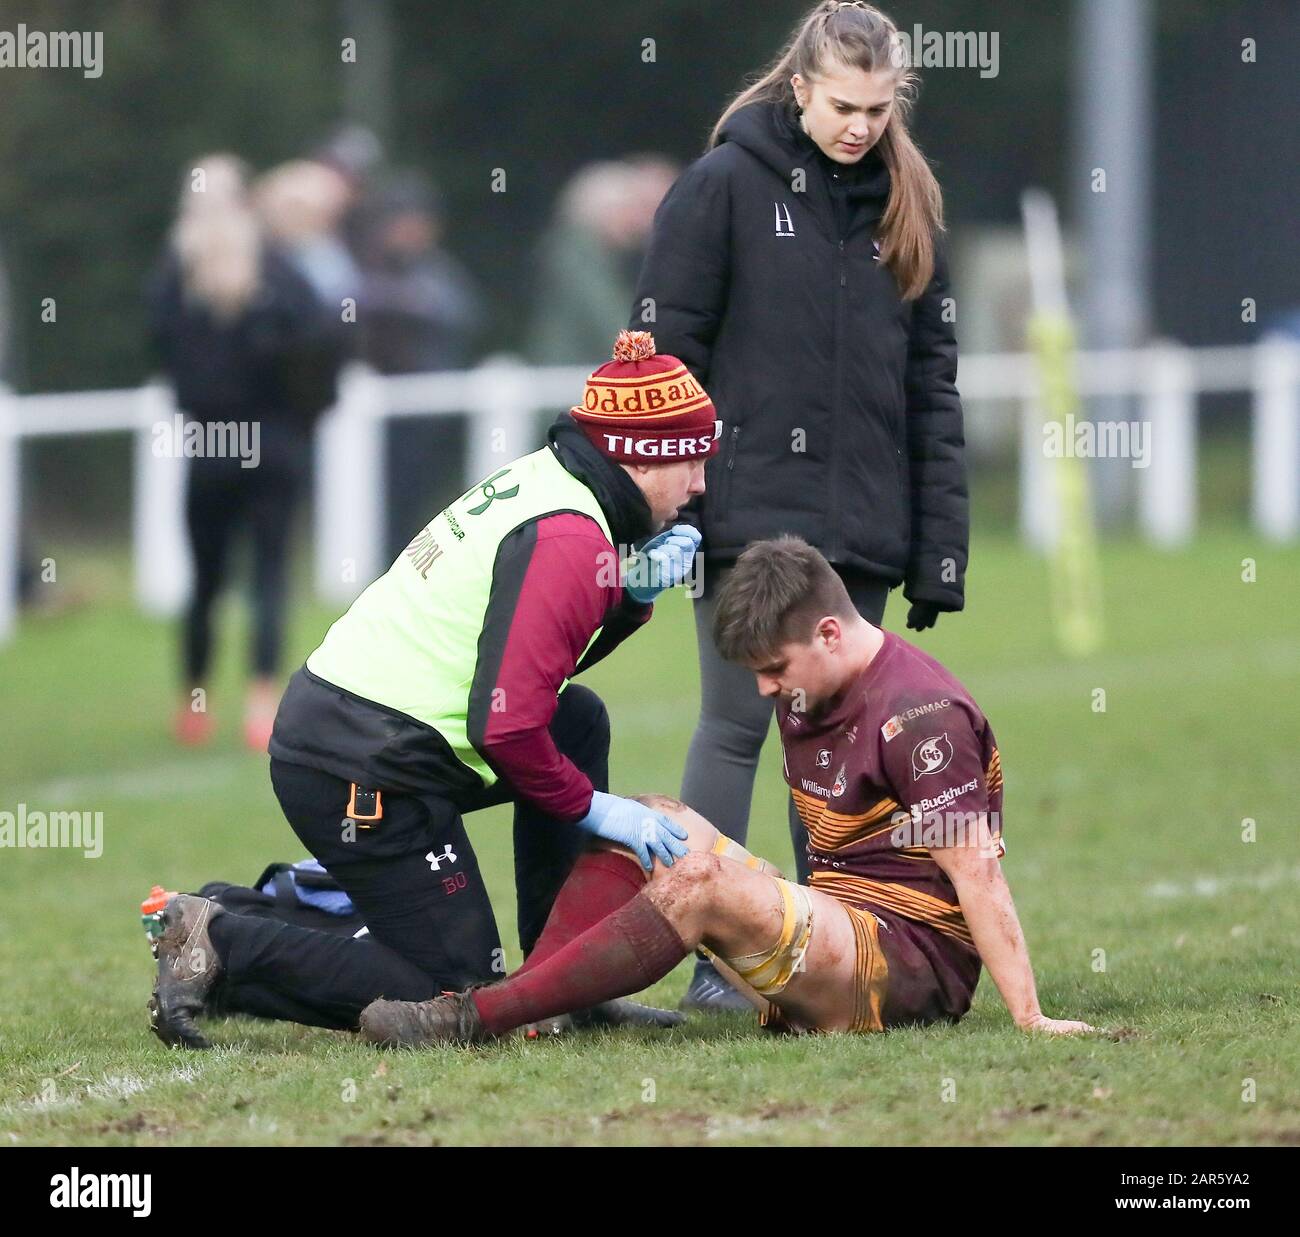 25.01.2020, Hinckley, Leicester, England. Rugby Union, Hinckley rfc v Sedgley Park rfc.   Elliot Crowe is treated fir an injury which forces him from the field during the RFU National League 2 North (NL2N) game played at the Leicester  Road Stadium. Stock Photo